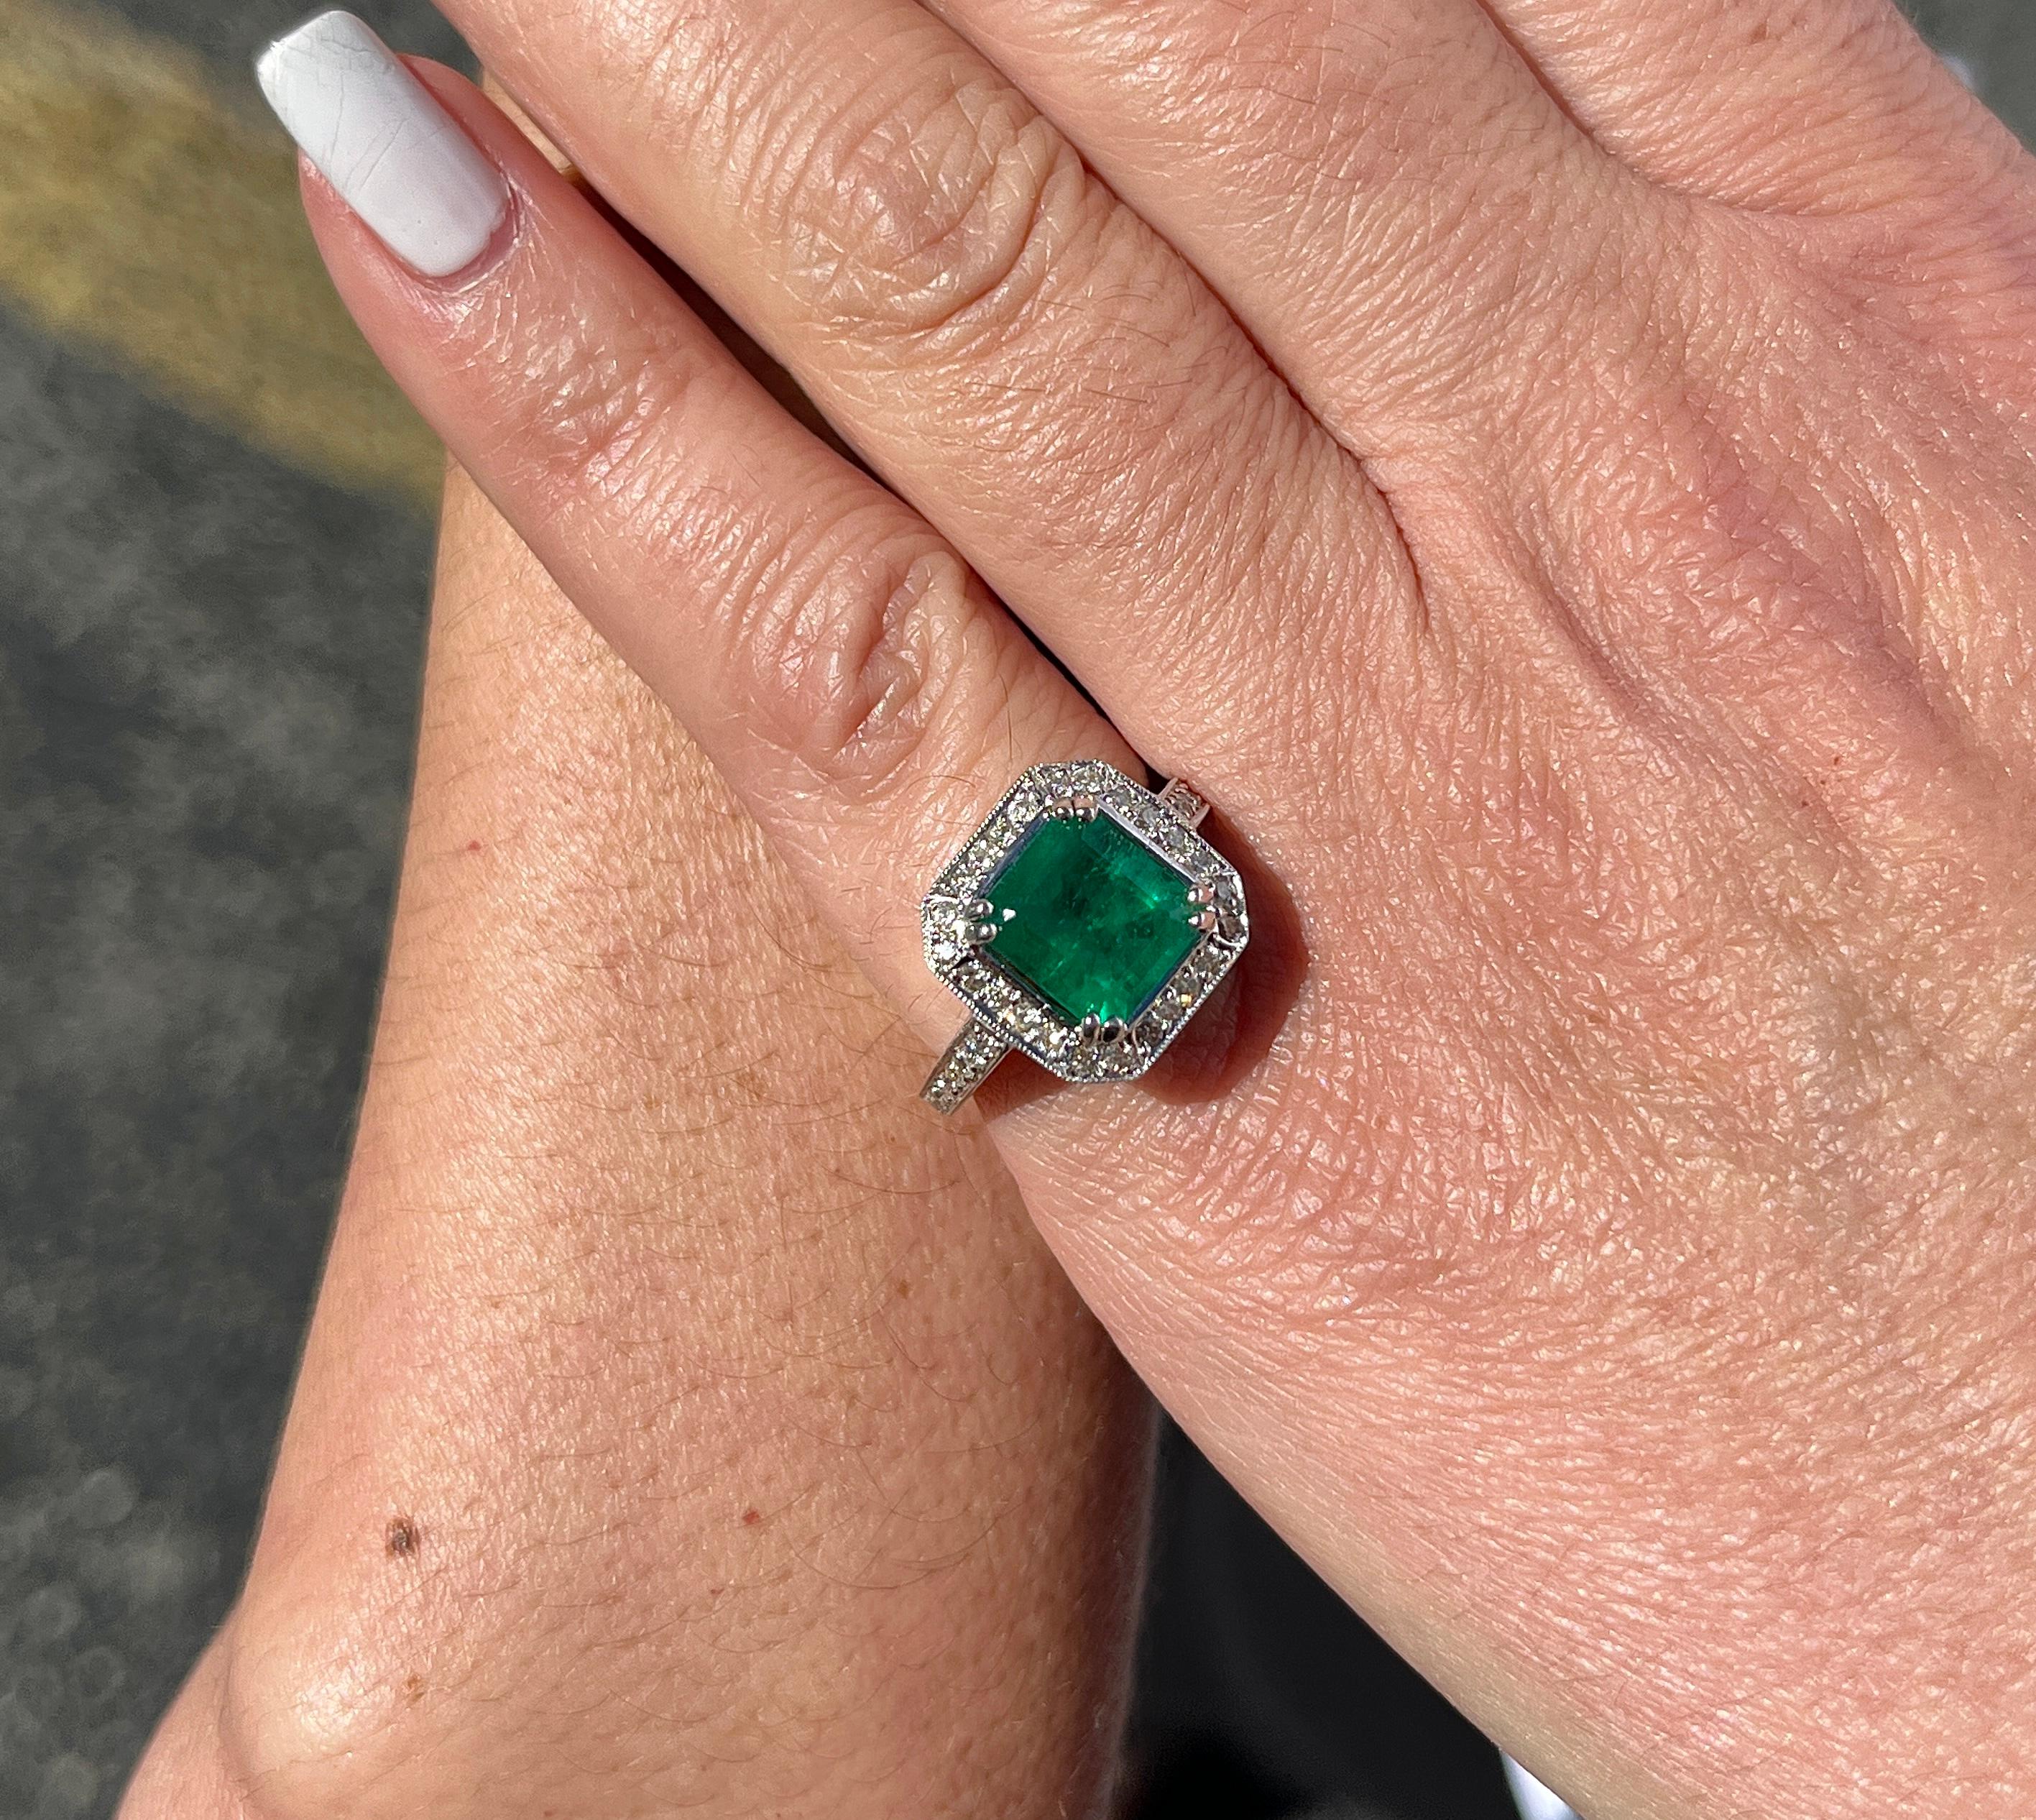 3 Carat Colombian Emerald in 18K White Gold Ring & Round Cut Diamond Halo For Sale 1